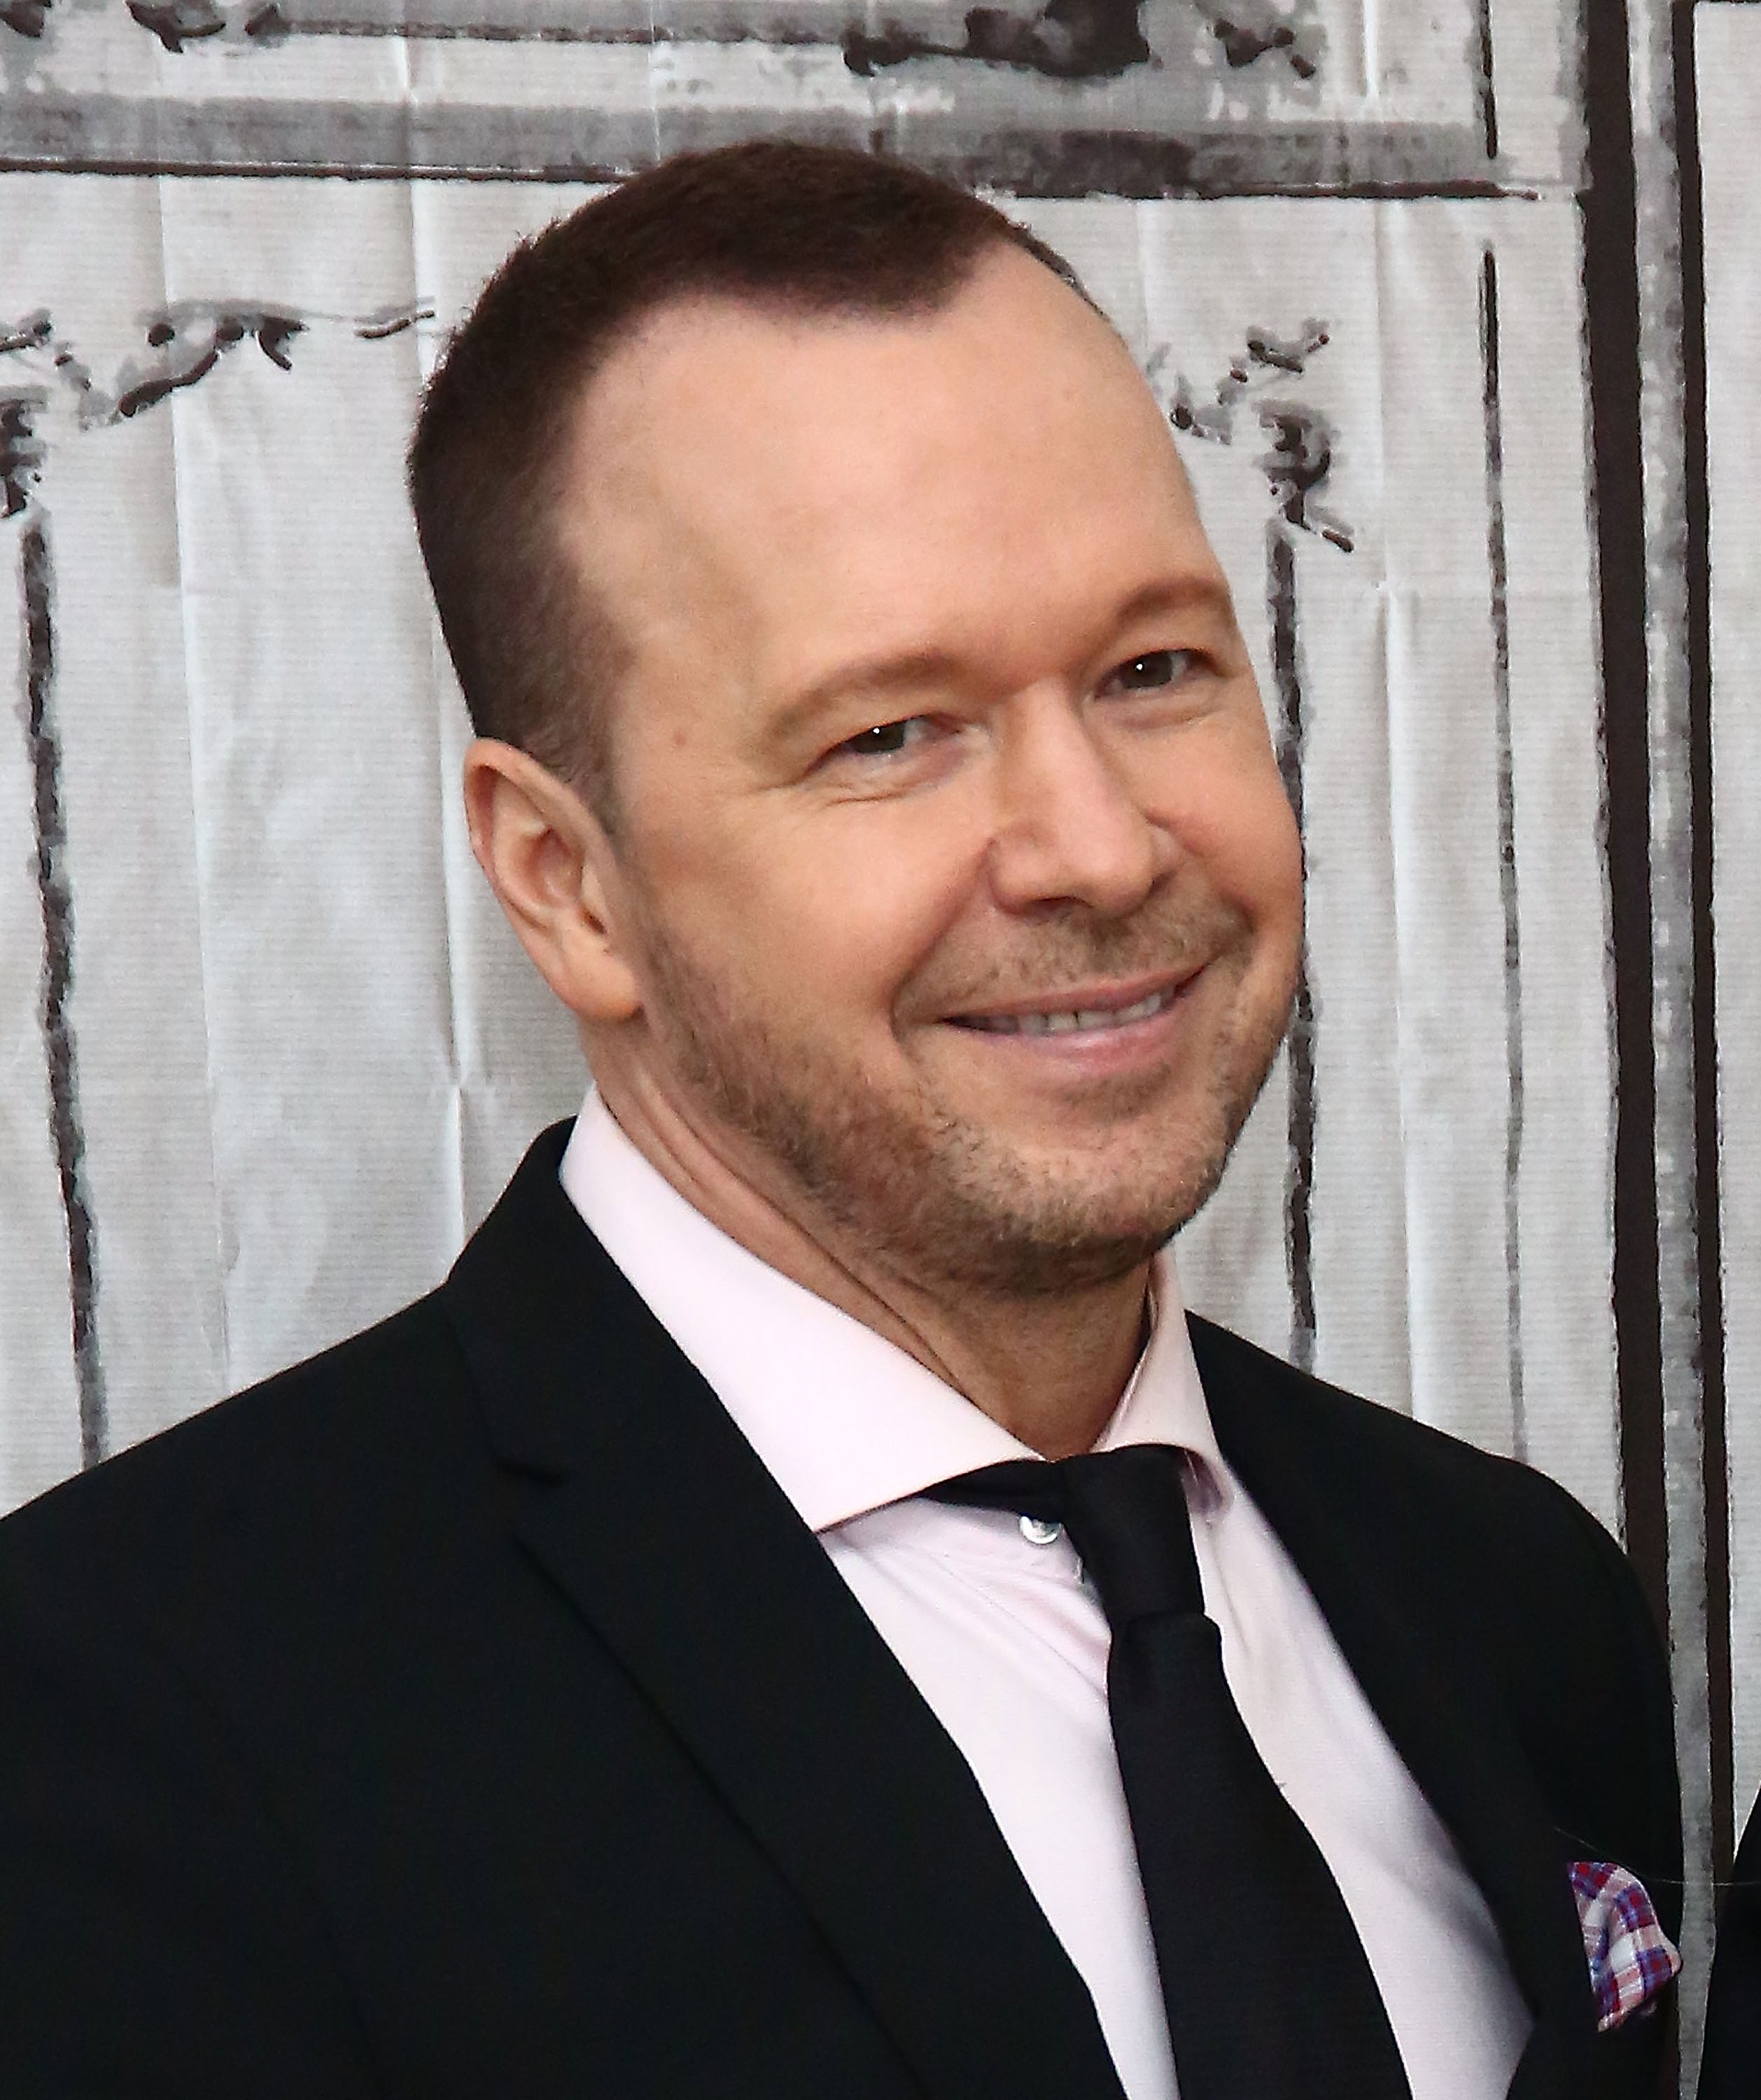  Donnie Wahlberg attends AOL Build Presents "Donnie Loves Jenny" on March 16, 2016, in New York City. | Source: Getty Images.